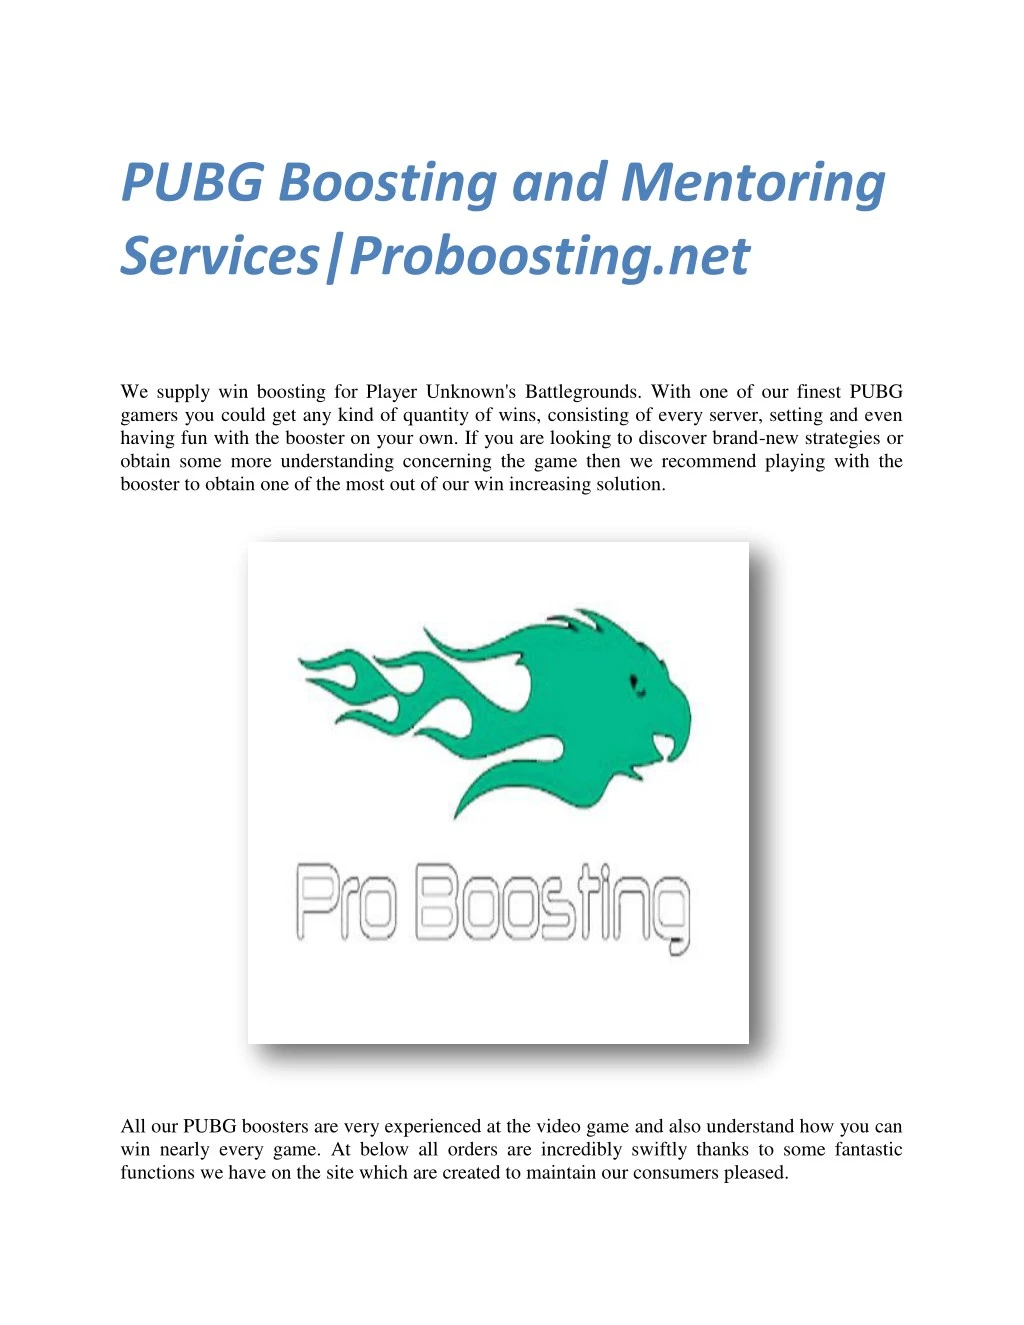 pubg boosting and mentoring services proboosting